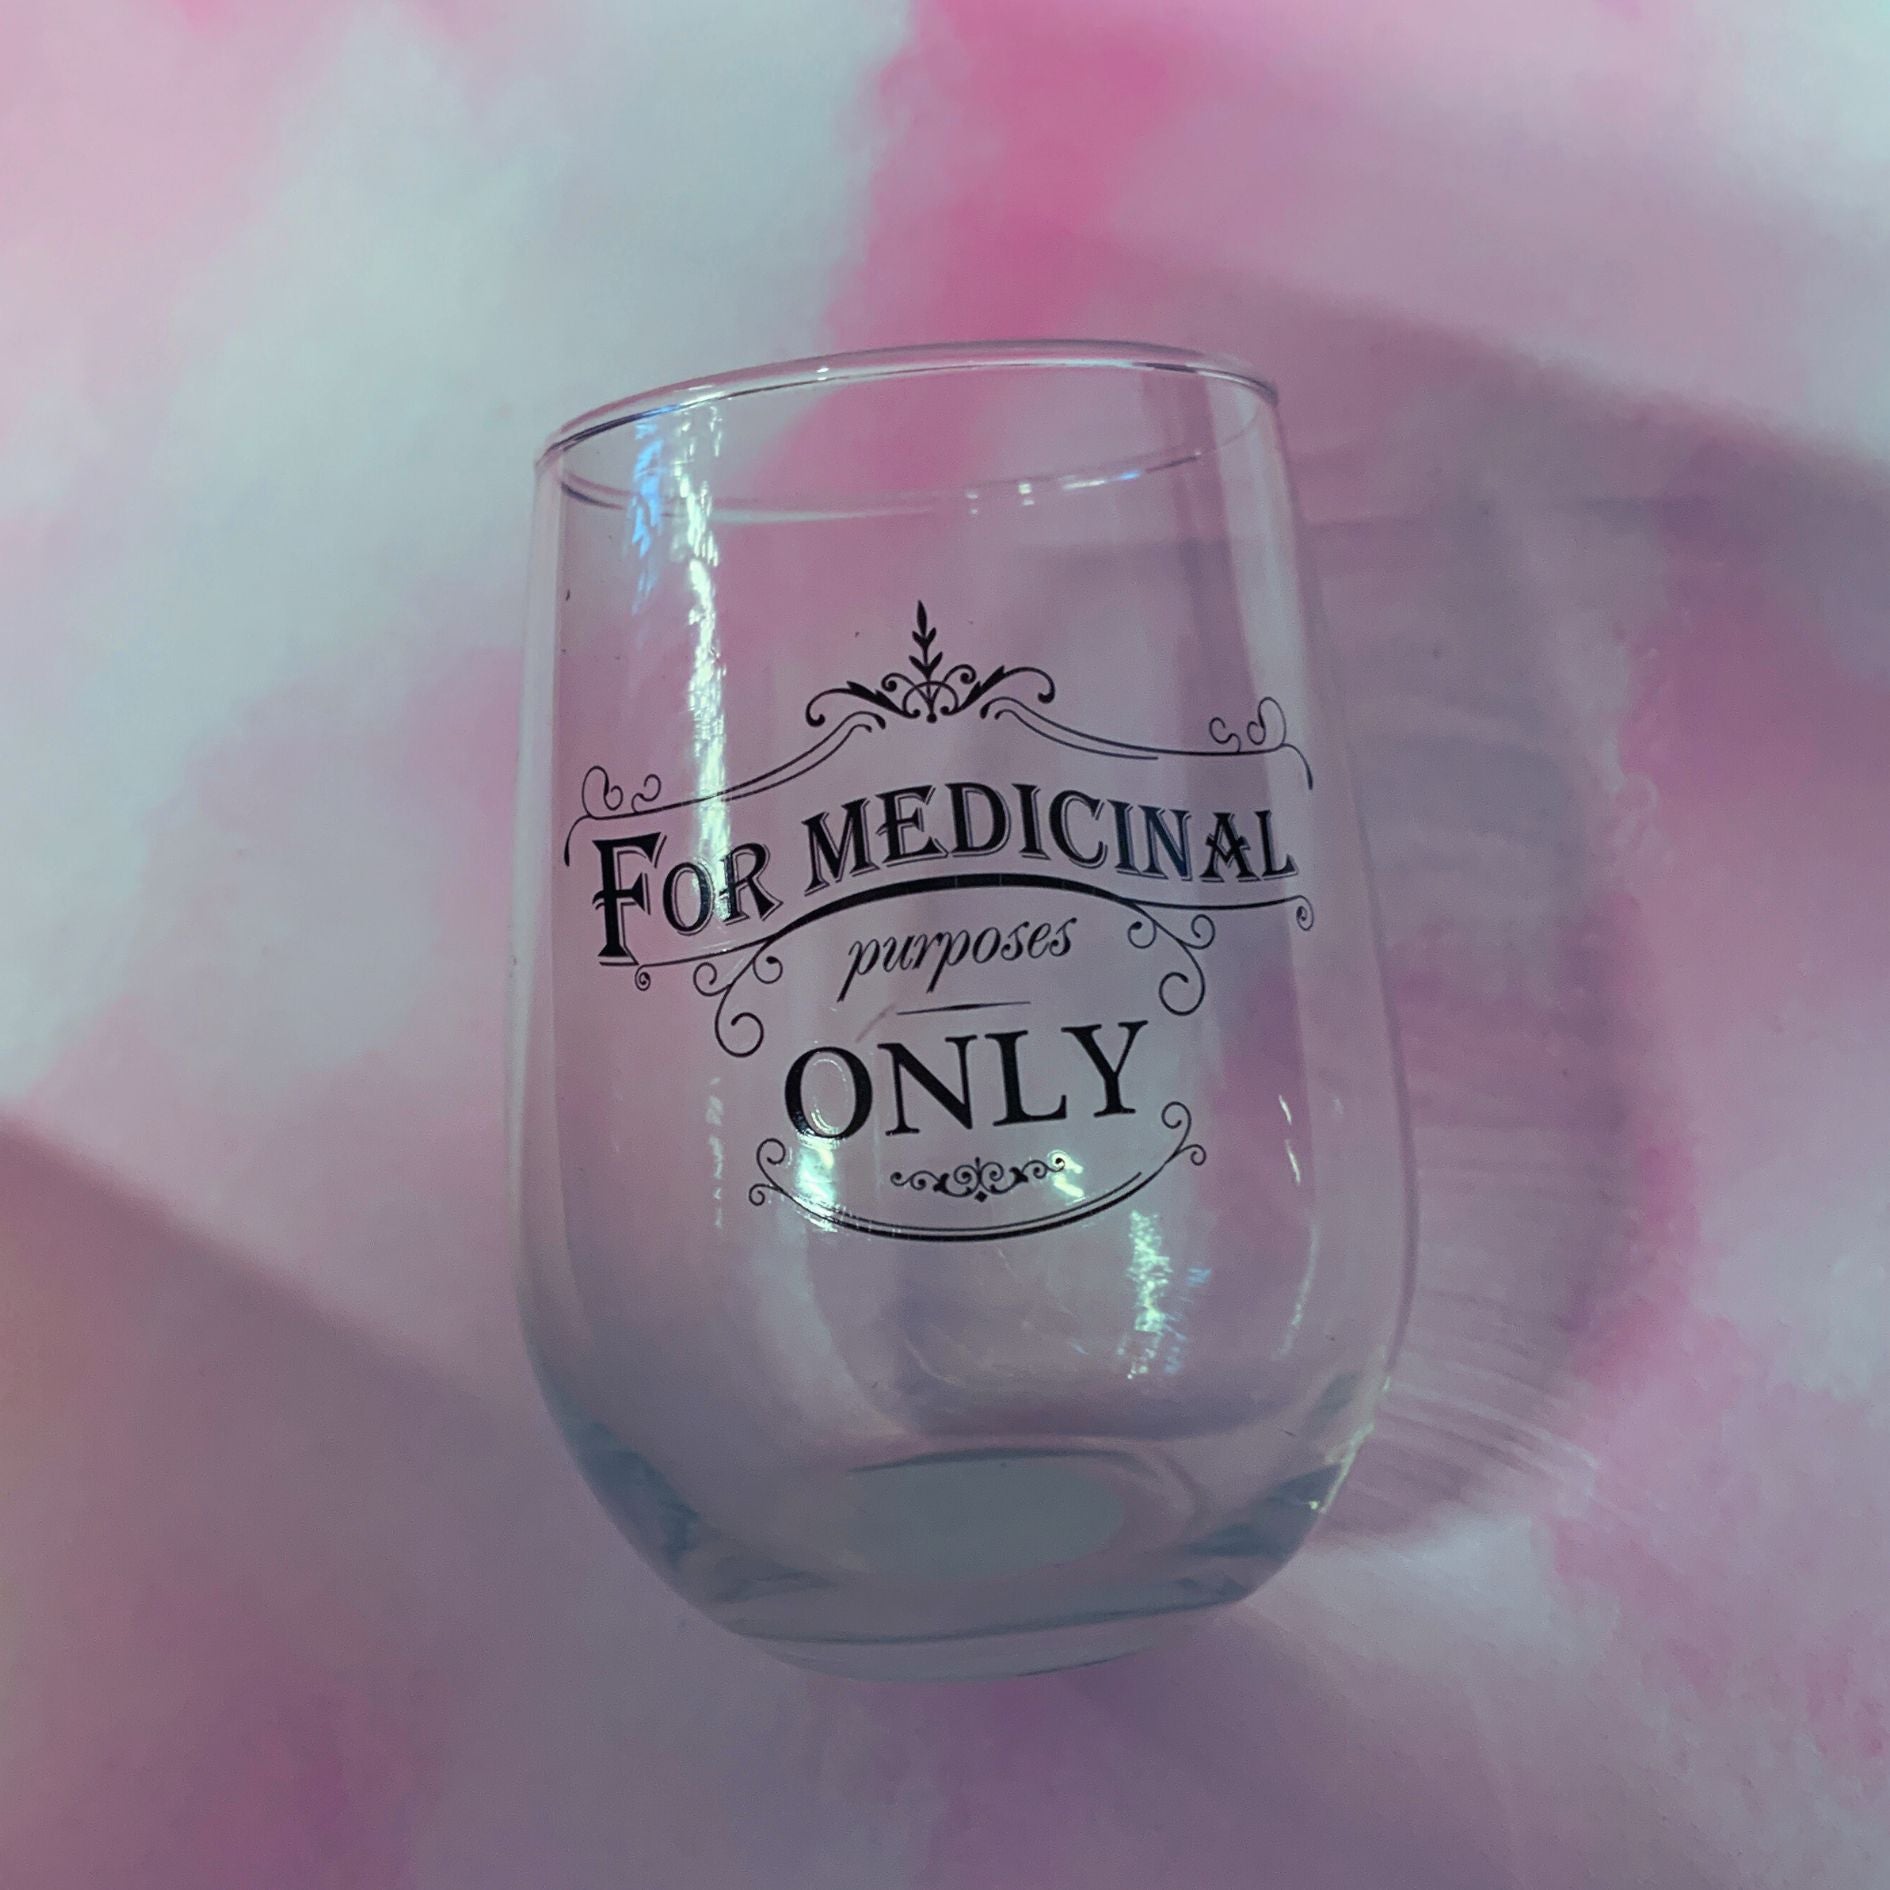 For Medicinal Purposes Only Stemless Wine Glass | Set of 2